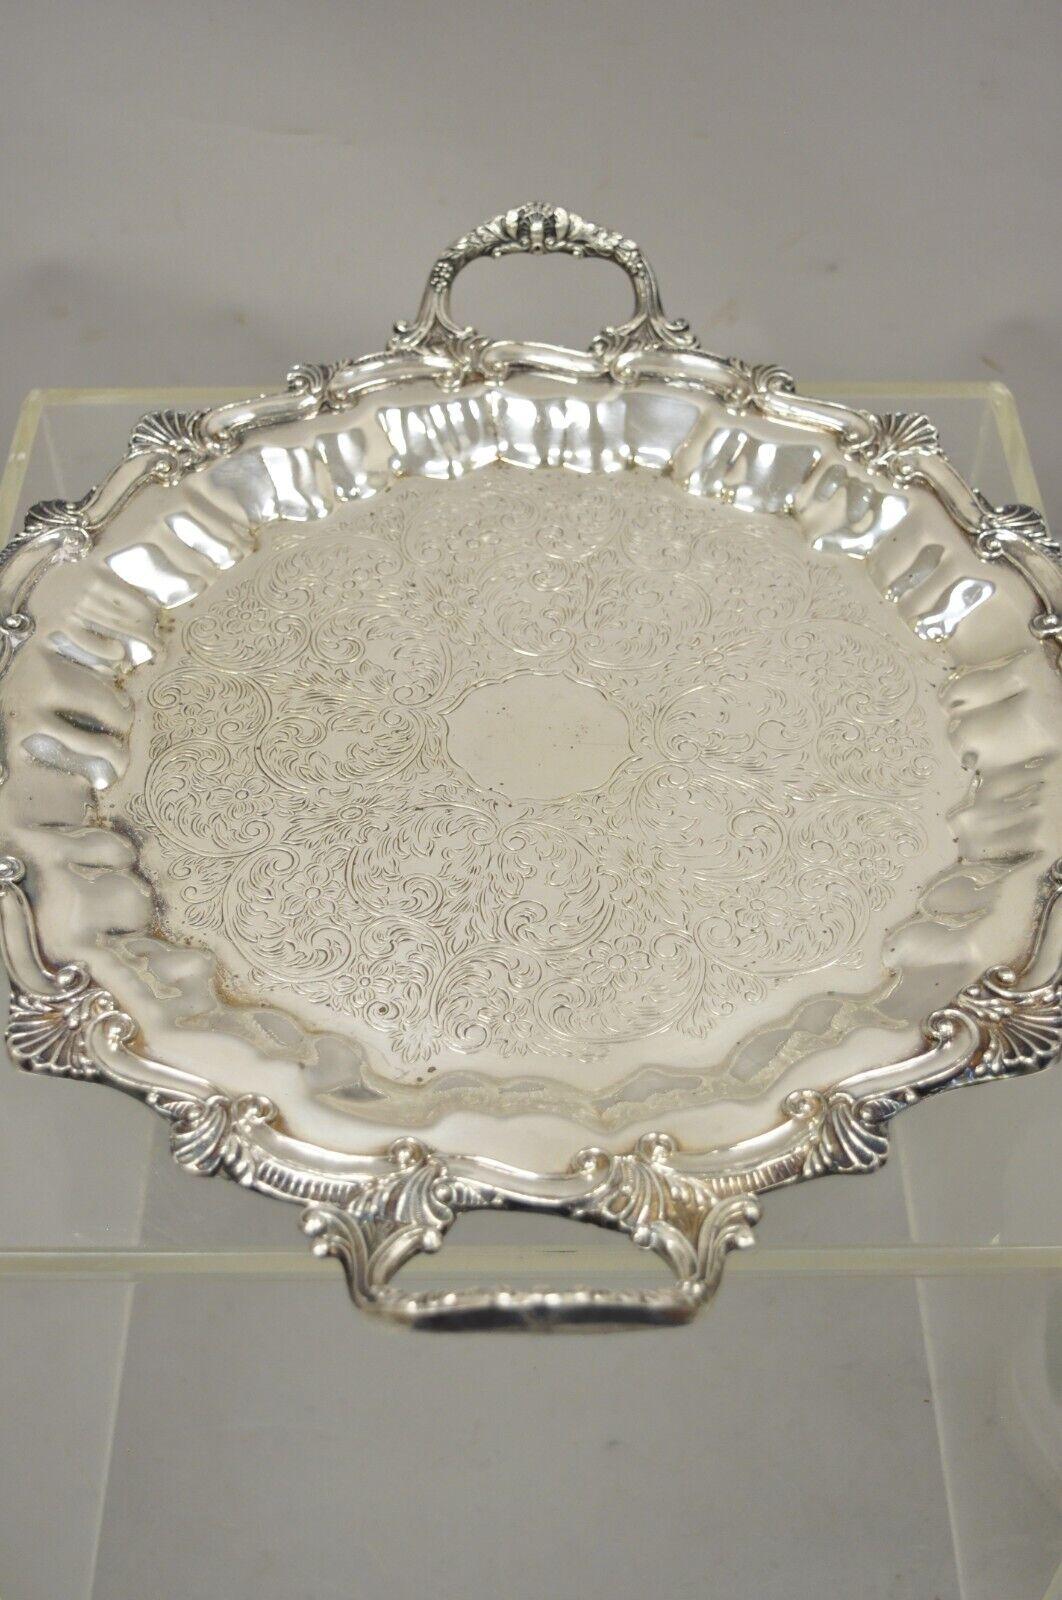 Regency Style Ornate Heavy Silver Plated Twin Handle Scalloped Platter Tray For Sale 2